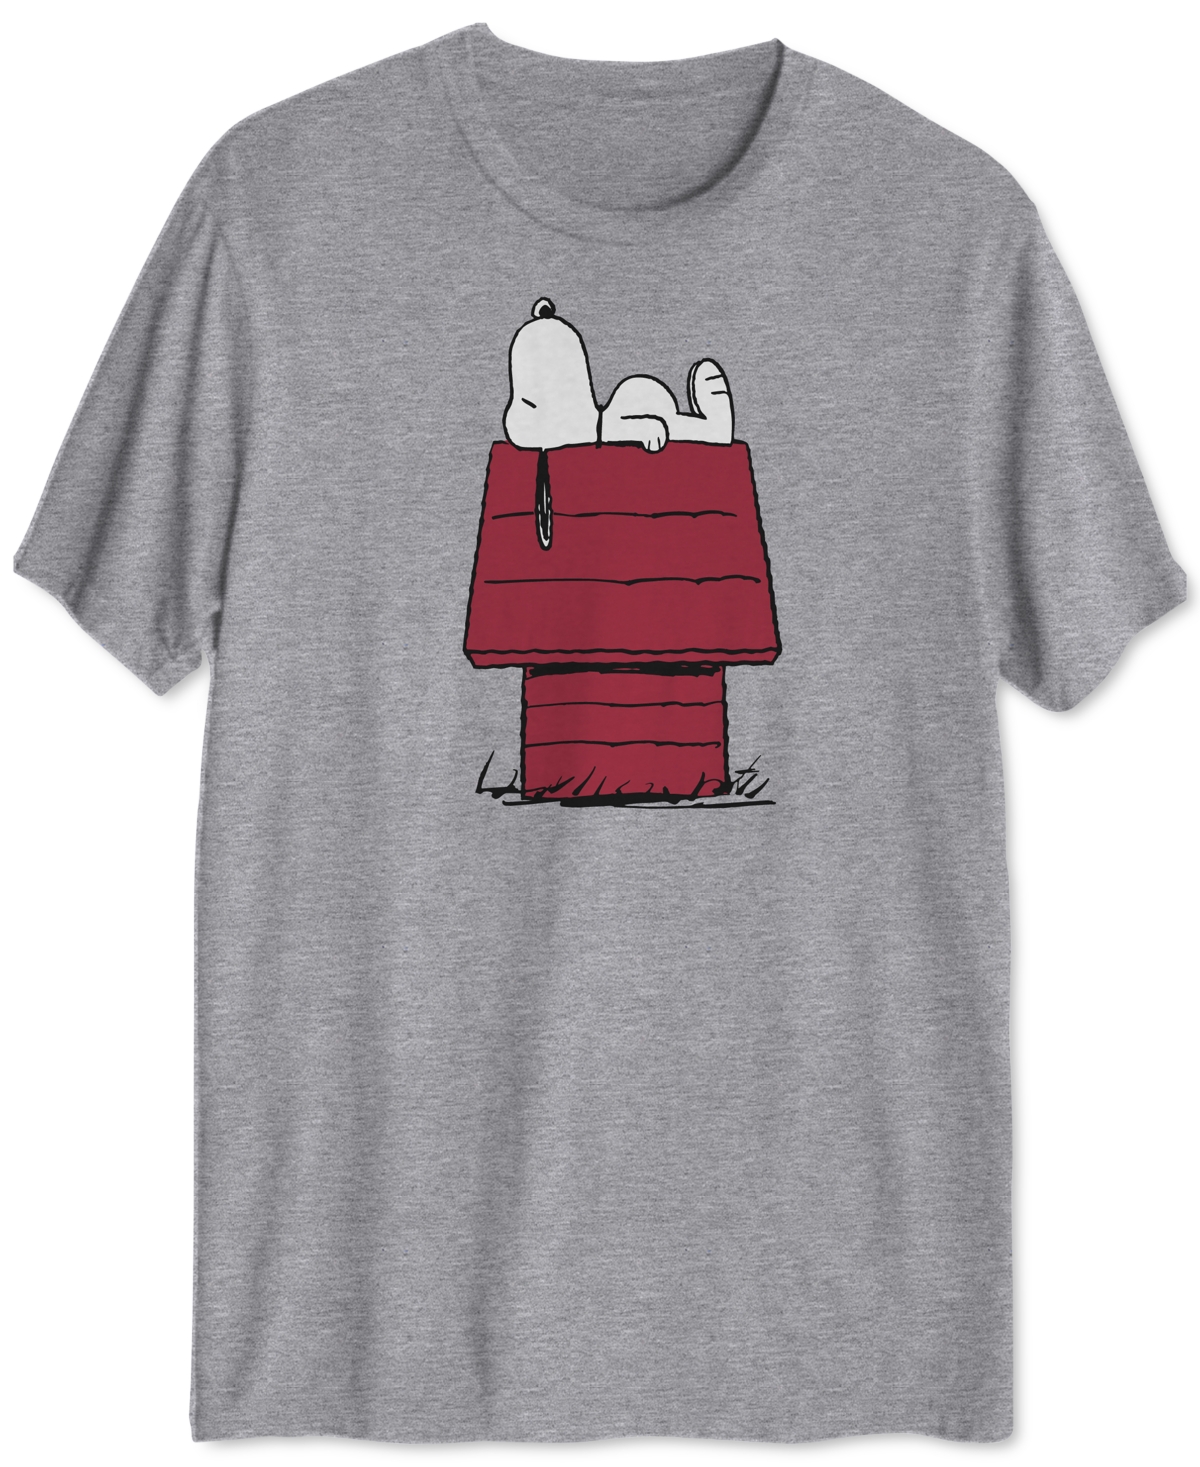 HYBRID SNOOPY DOGHOUSE MEN'S GRAPHIC T-SHIRT